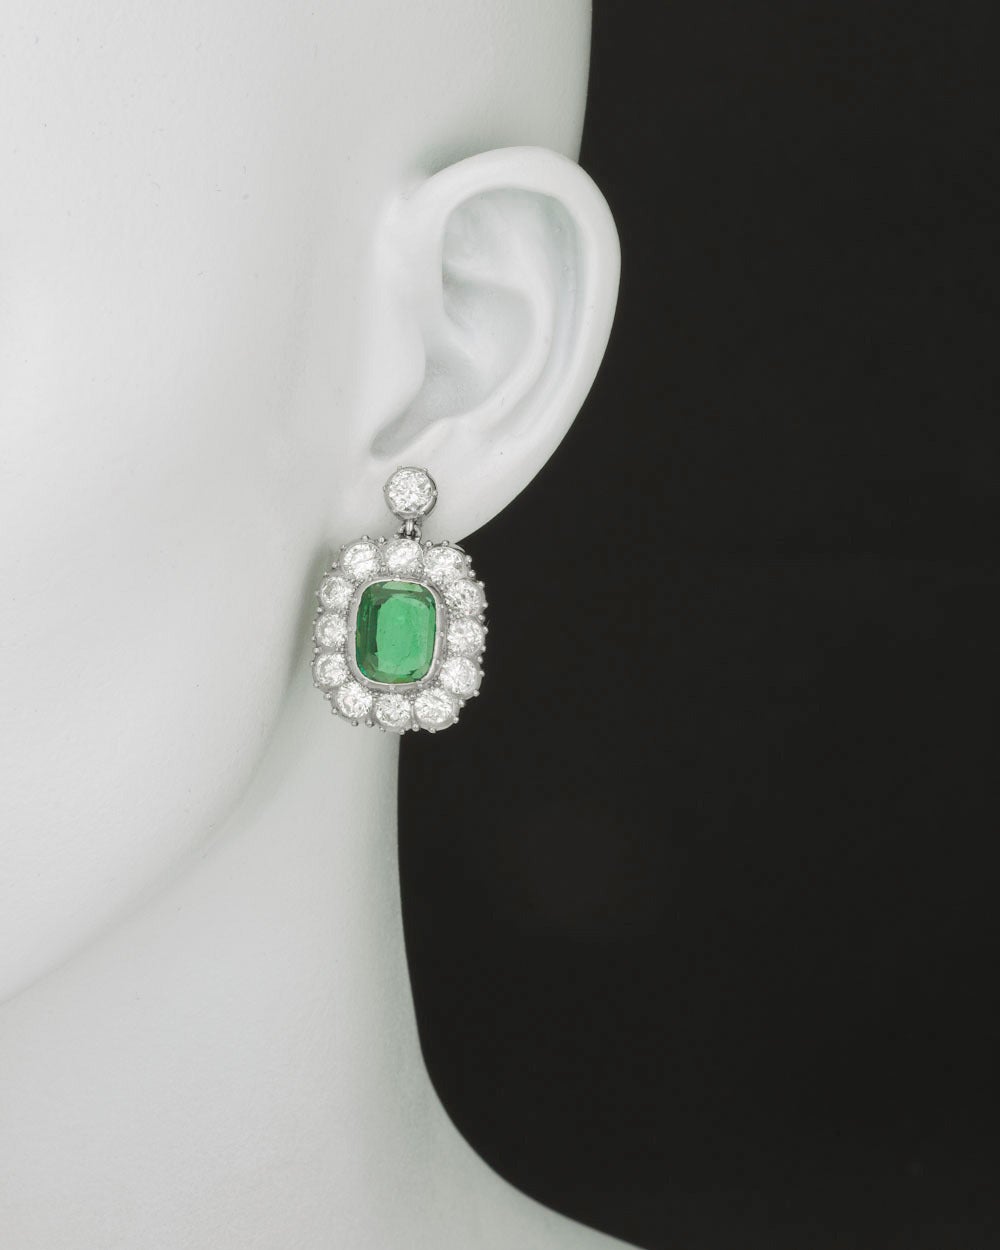 Emerald and diamond drop earrings, showcasing two cushion-shaped emeralds weighing approximately 3.42 total carats, surrounded by circular-cut diamonds weighing approximately 10.62 total carats, mounted in platinum, with posts. 1.25